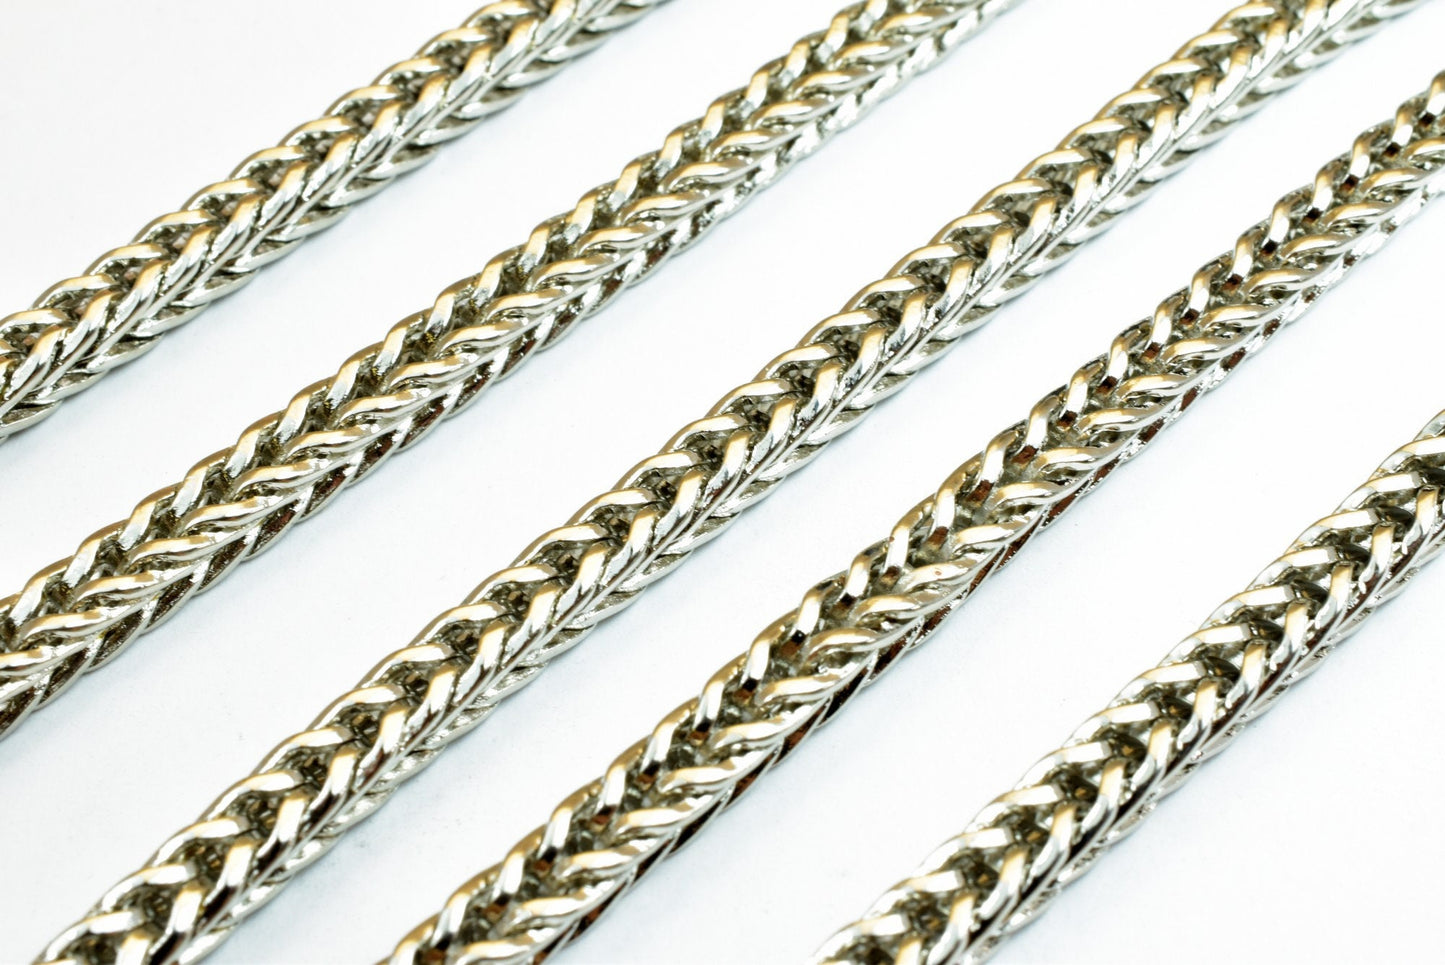 Spiga or Wheat Rhodium Filled White Gold Filled Chain 22" Inch, Size 4x4.5mm CS8 For Jewelry Making